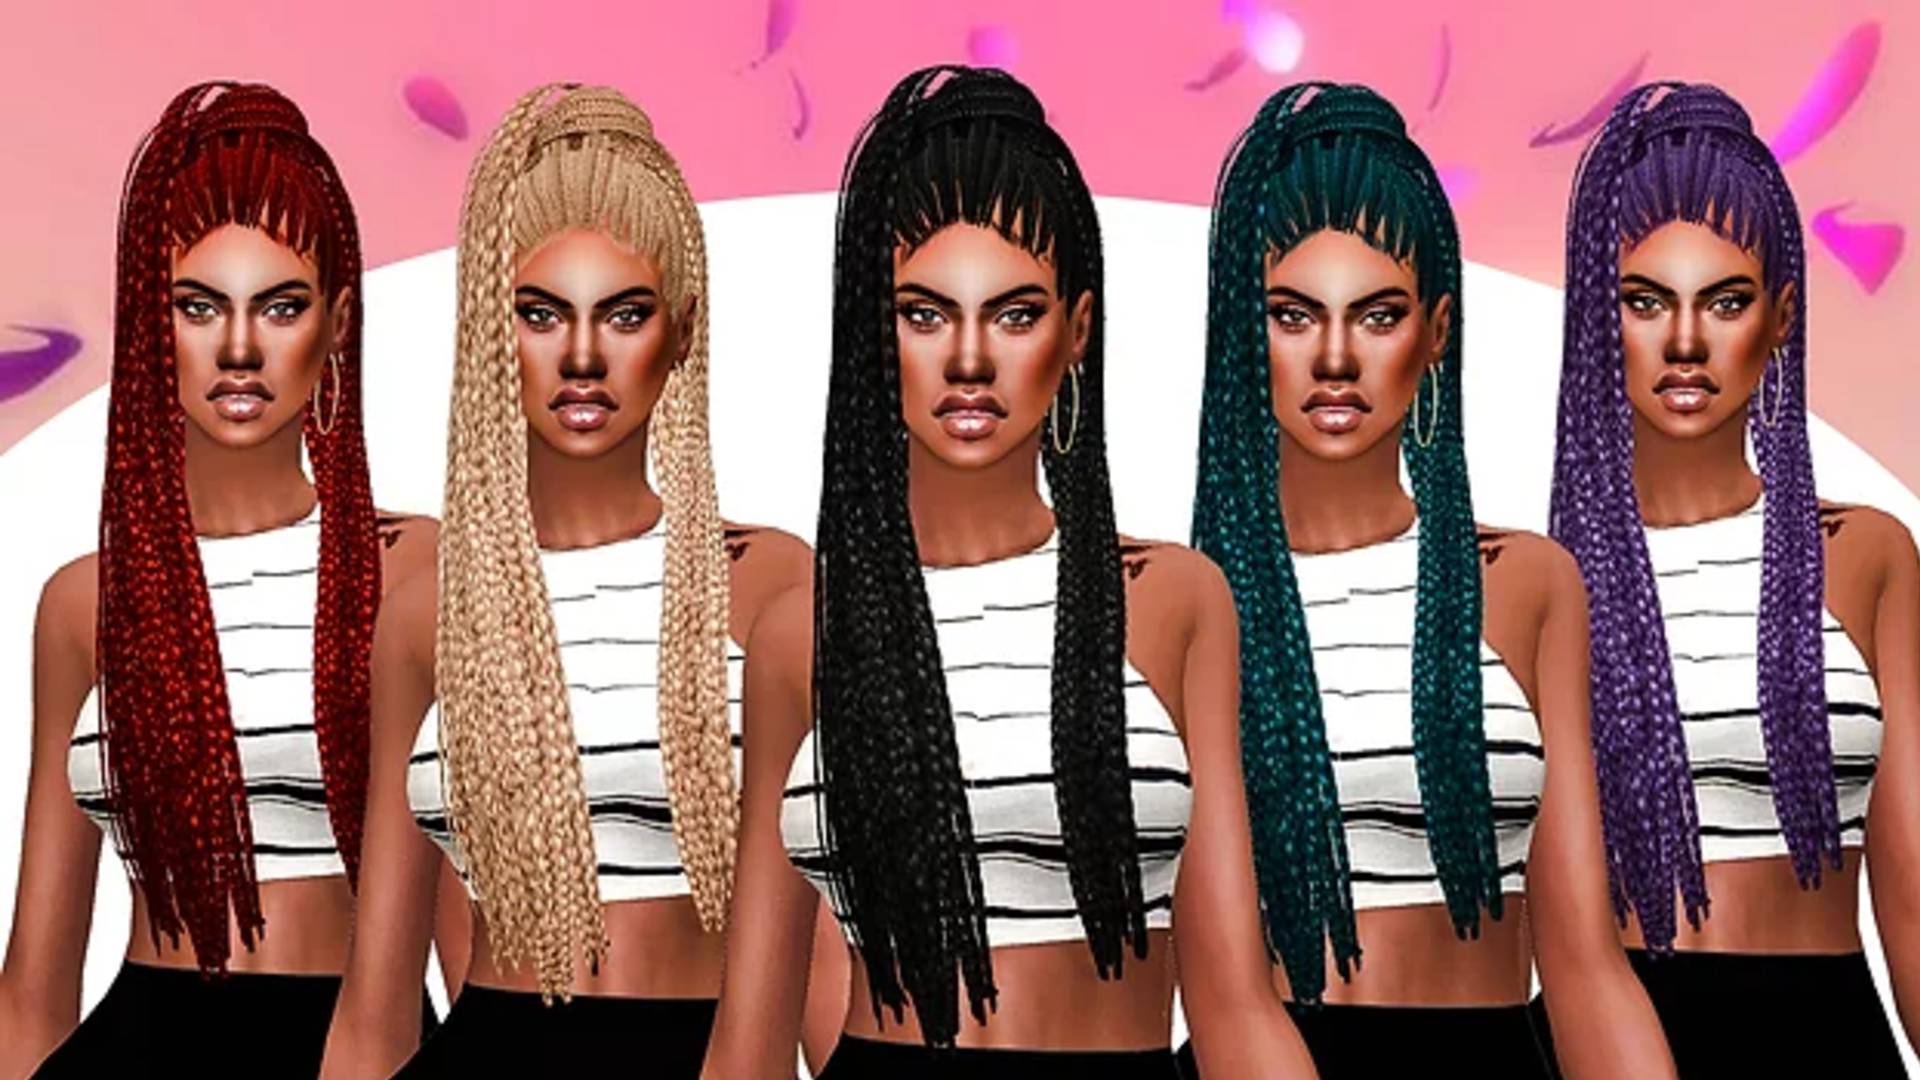 Sims 4 CC: A Sim modelling a custom dreadlock hair style in a variety of colours, from red to blonde to purple.